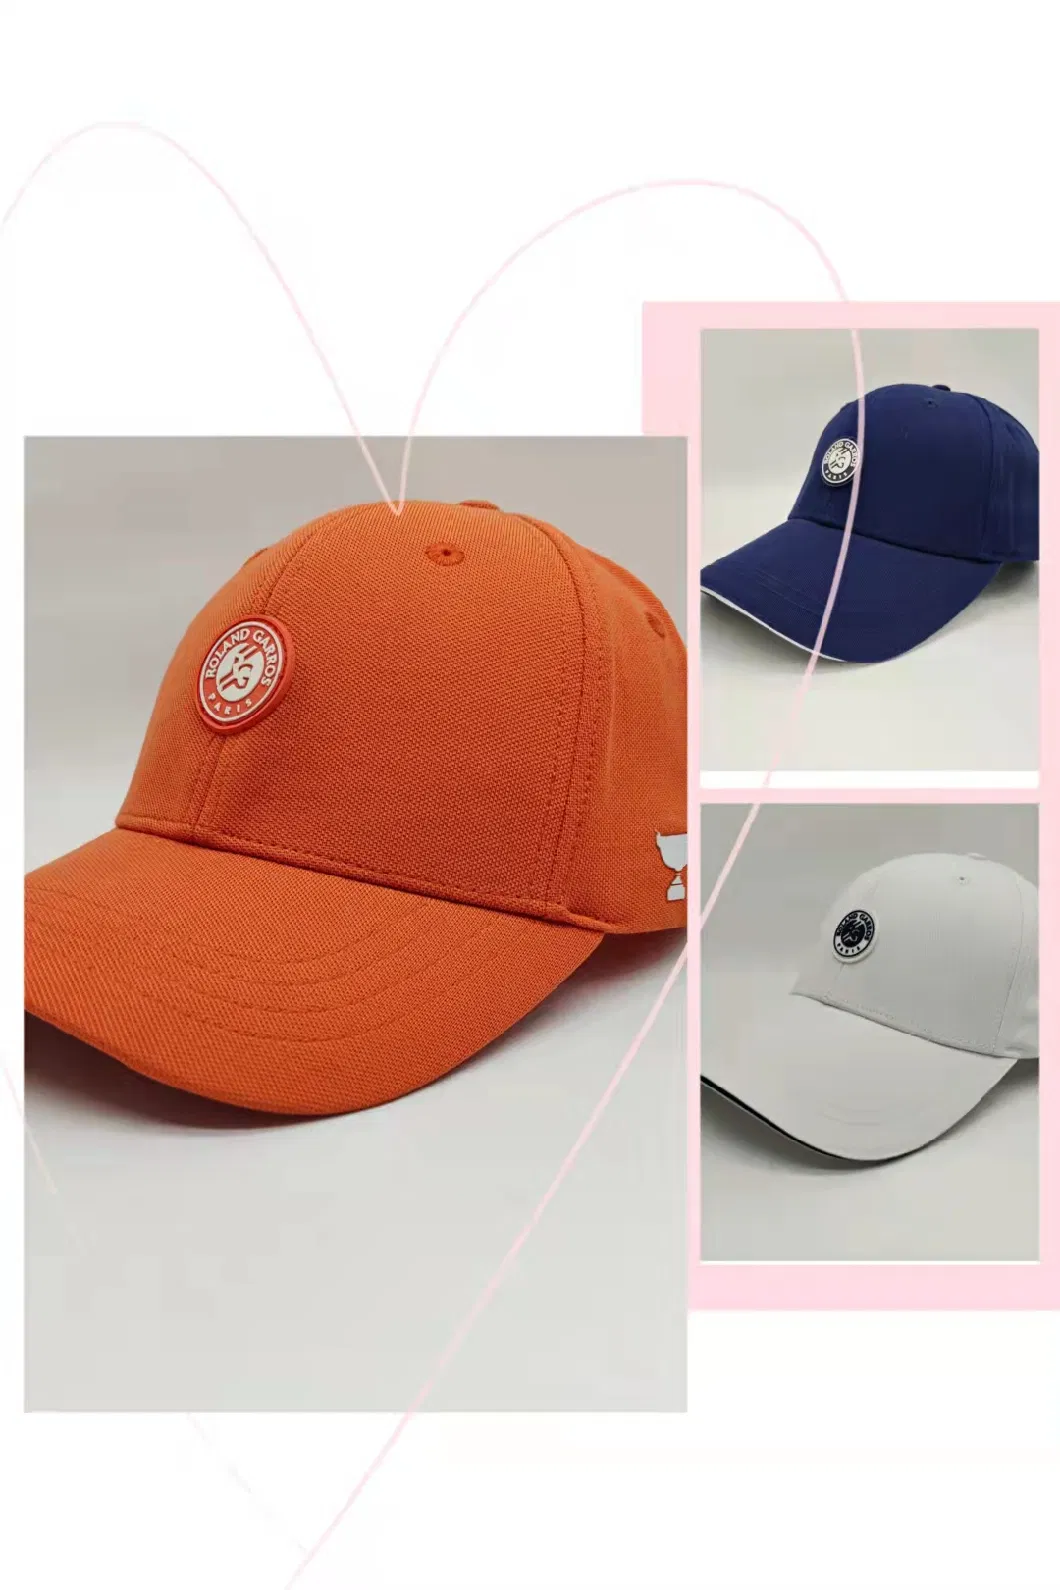 White Customized Cotton Baseball Cap Sports Hat with 3D Patch Logo Sandwich